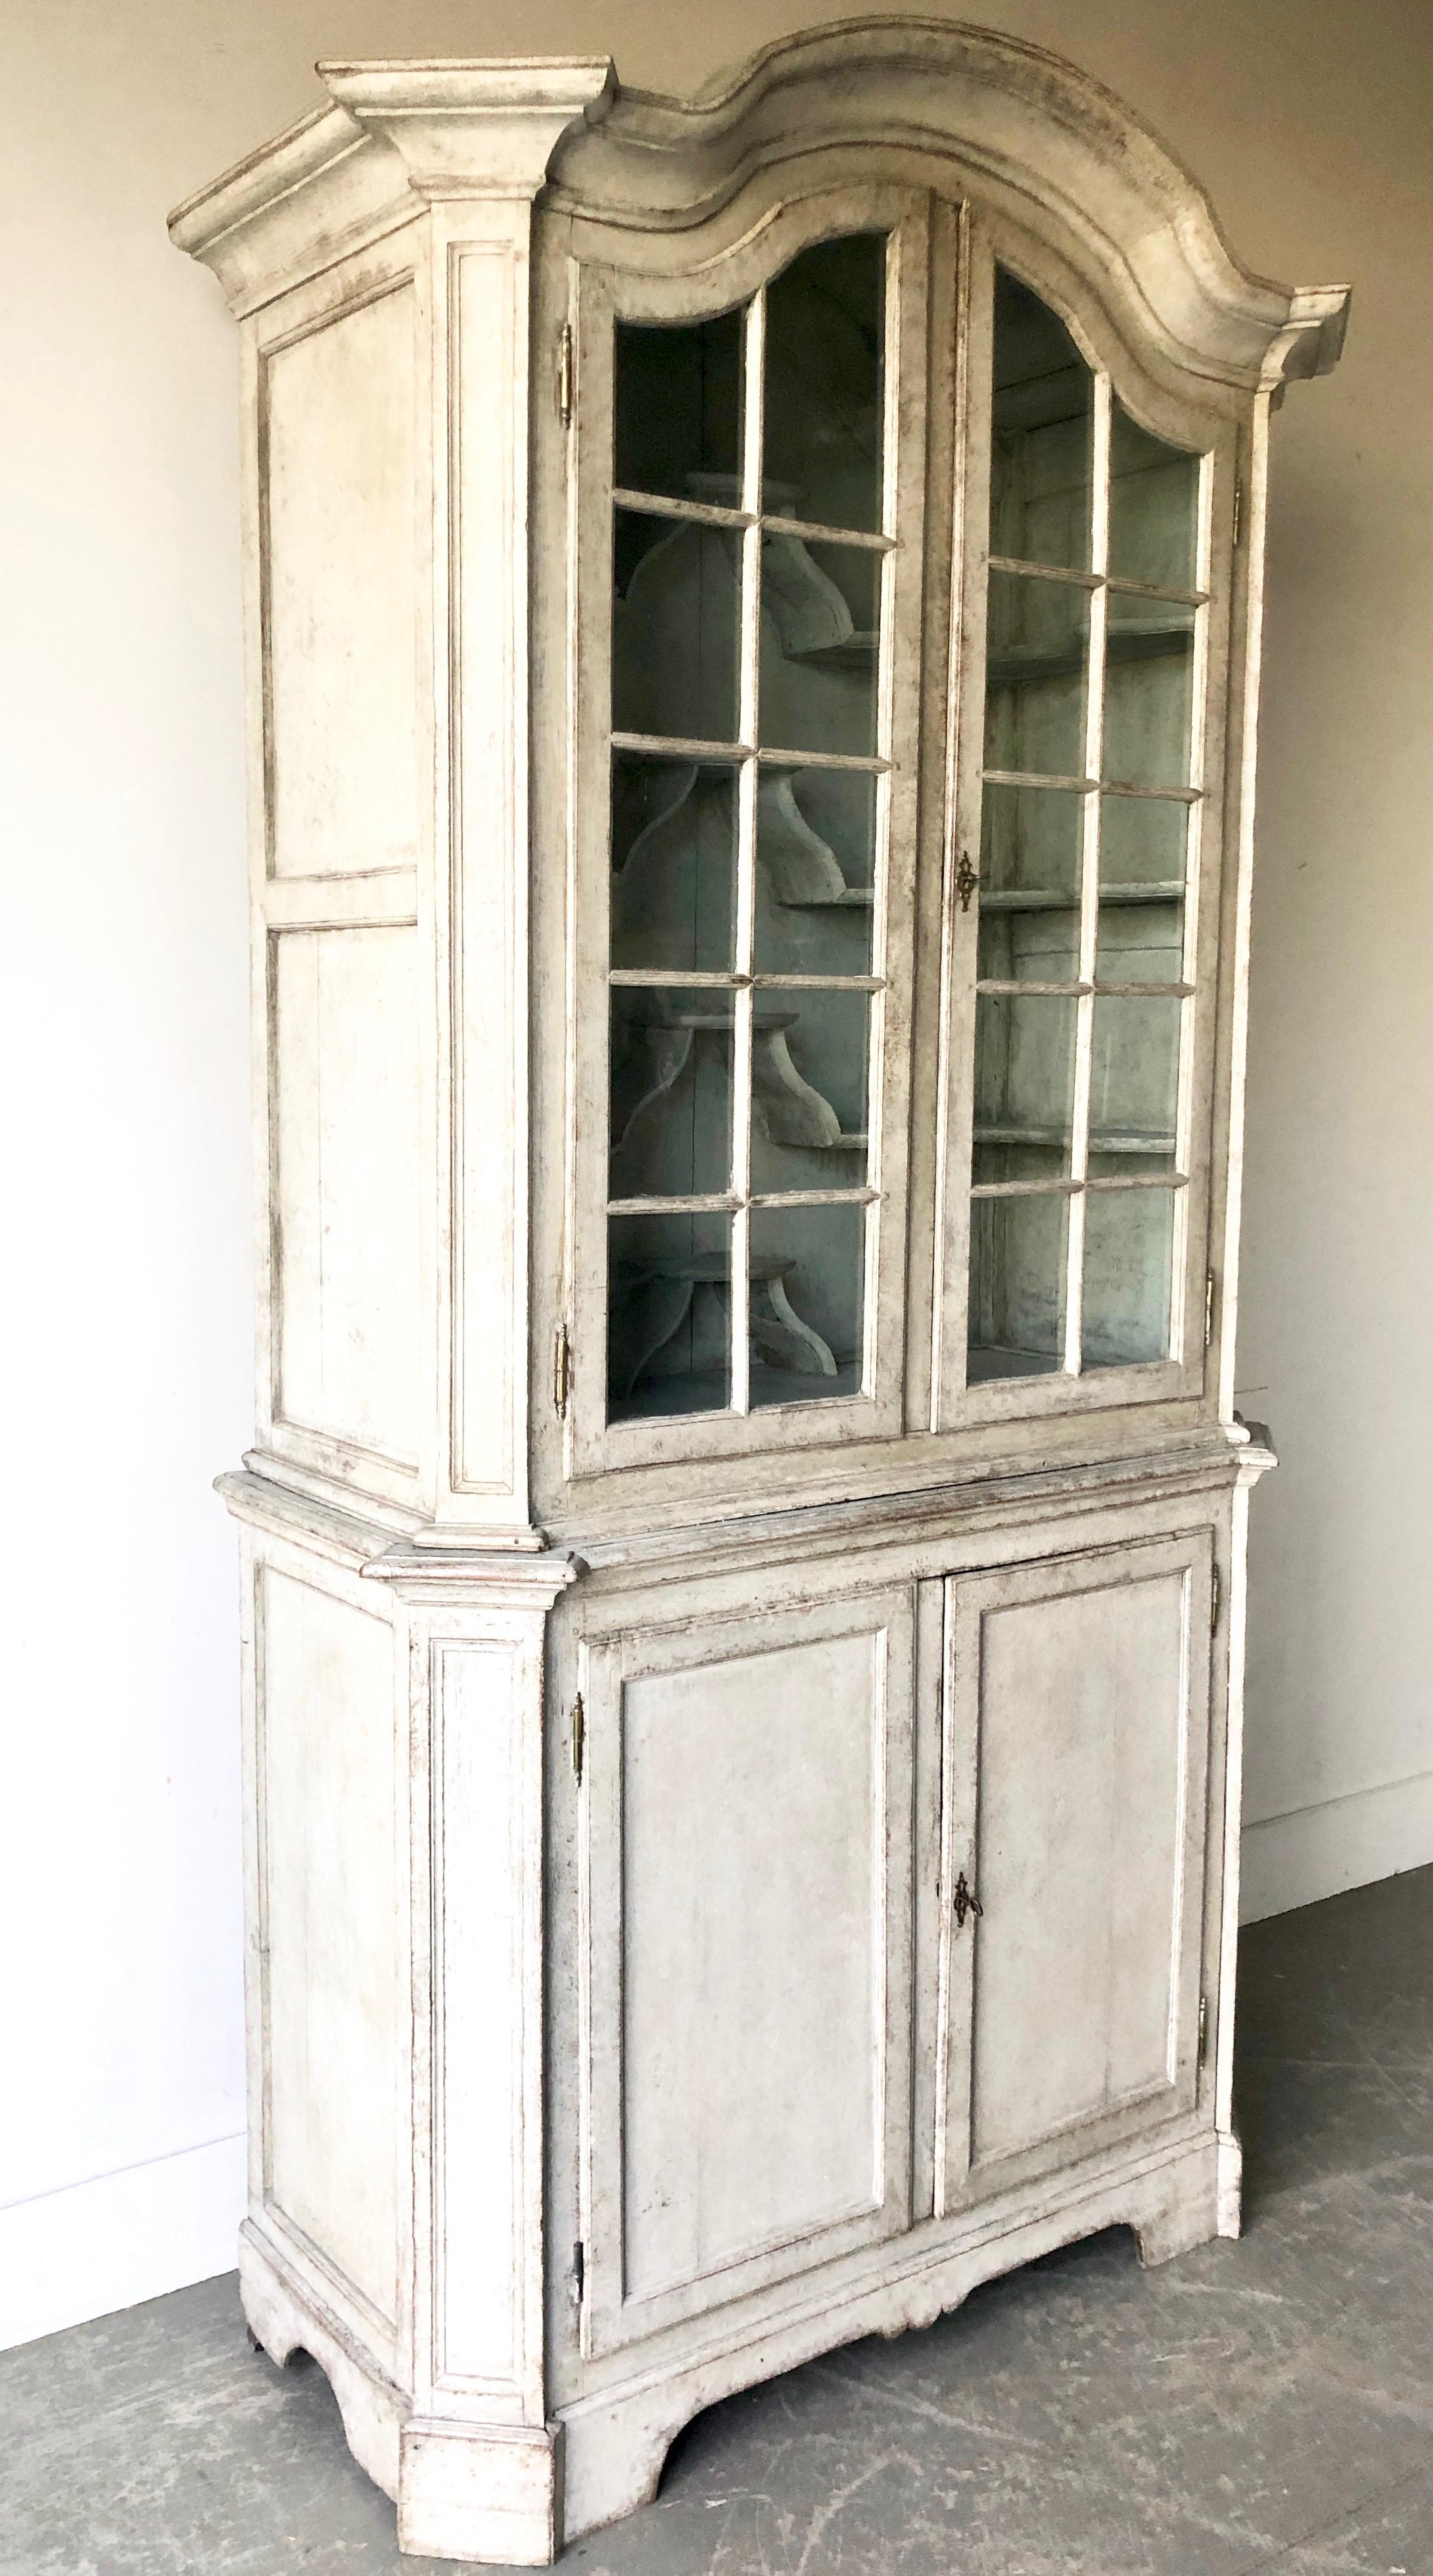 Swedish early 18th century period Rococo Vitrine cabinet in two parts with arched pediment over original glazed panel doors with multiple unusual bracket display shelves, supported the sturdy two-door base with bracket feet. Painted in grayish